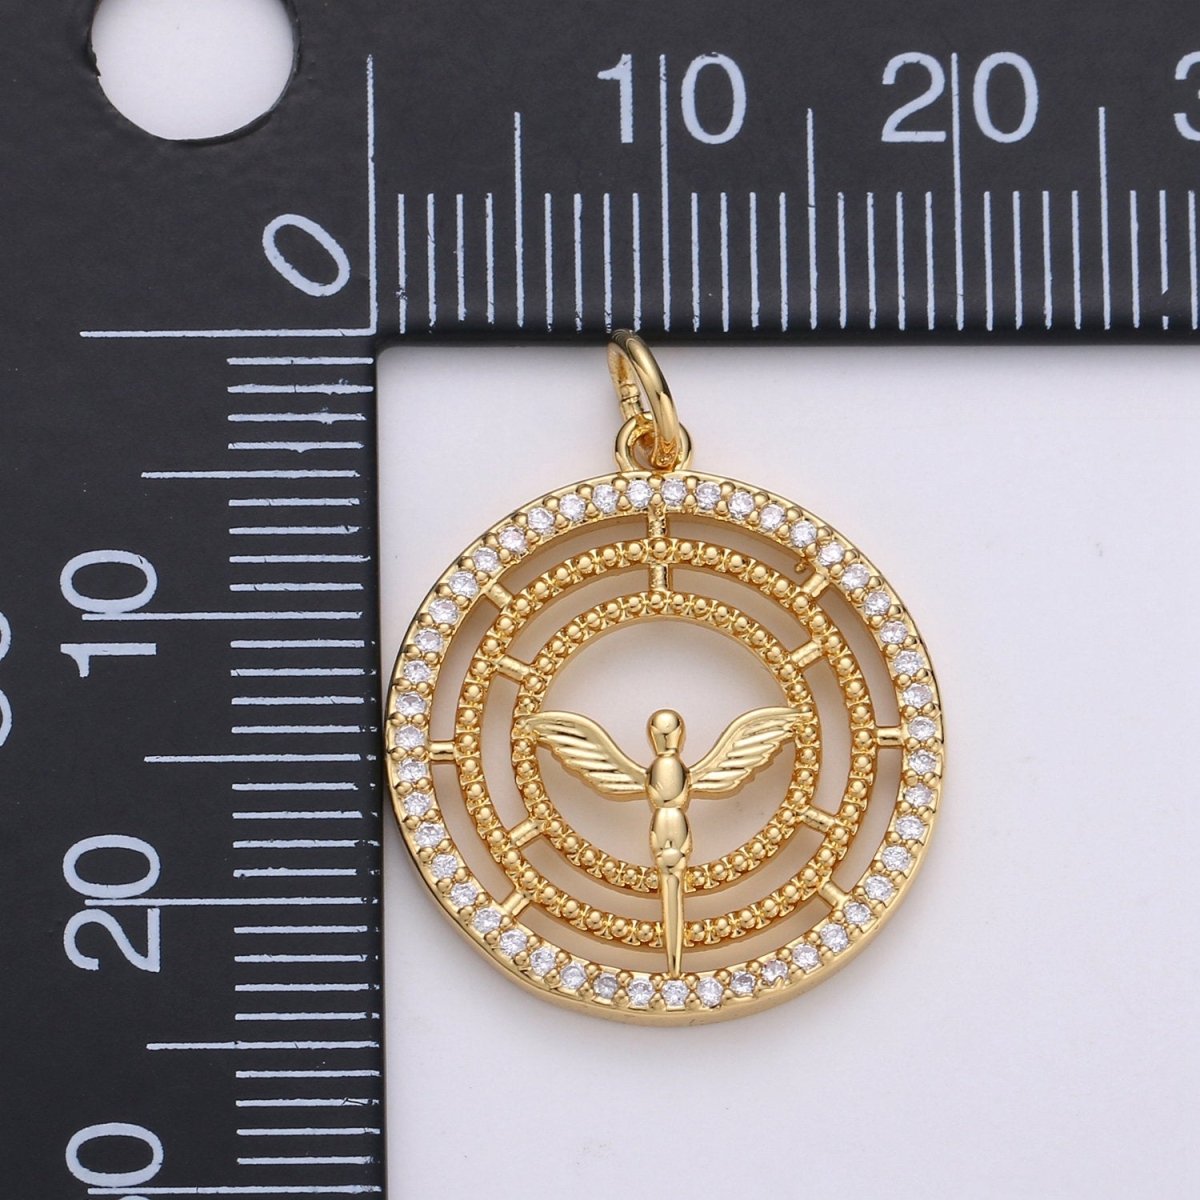 24k Gold Filled Angel Charm Micro Pave Cubic Angel Charm, Blessing Charms Angel Wings CZ Sparkle Gold Charm Dainty Minimalist Jewelry Supply D-641 - DLUXCA